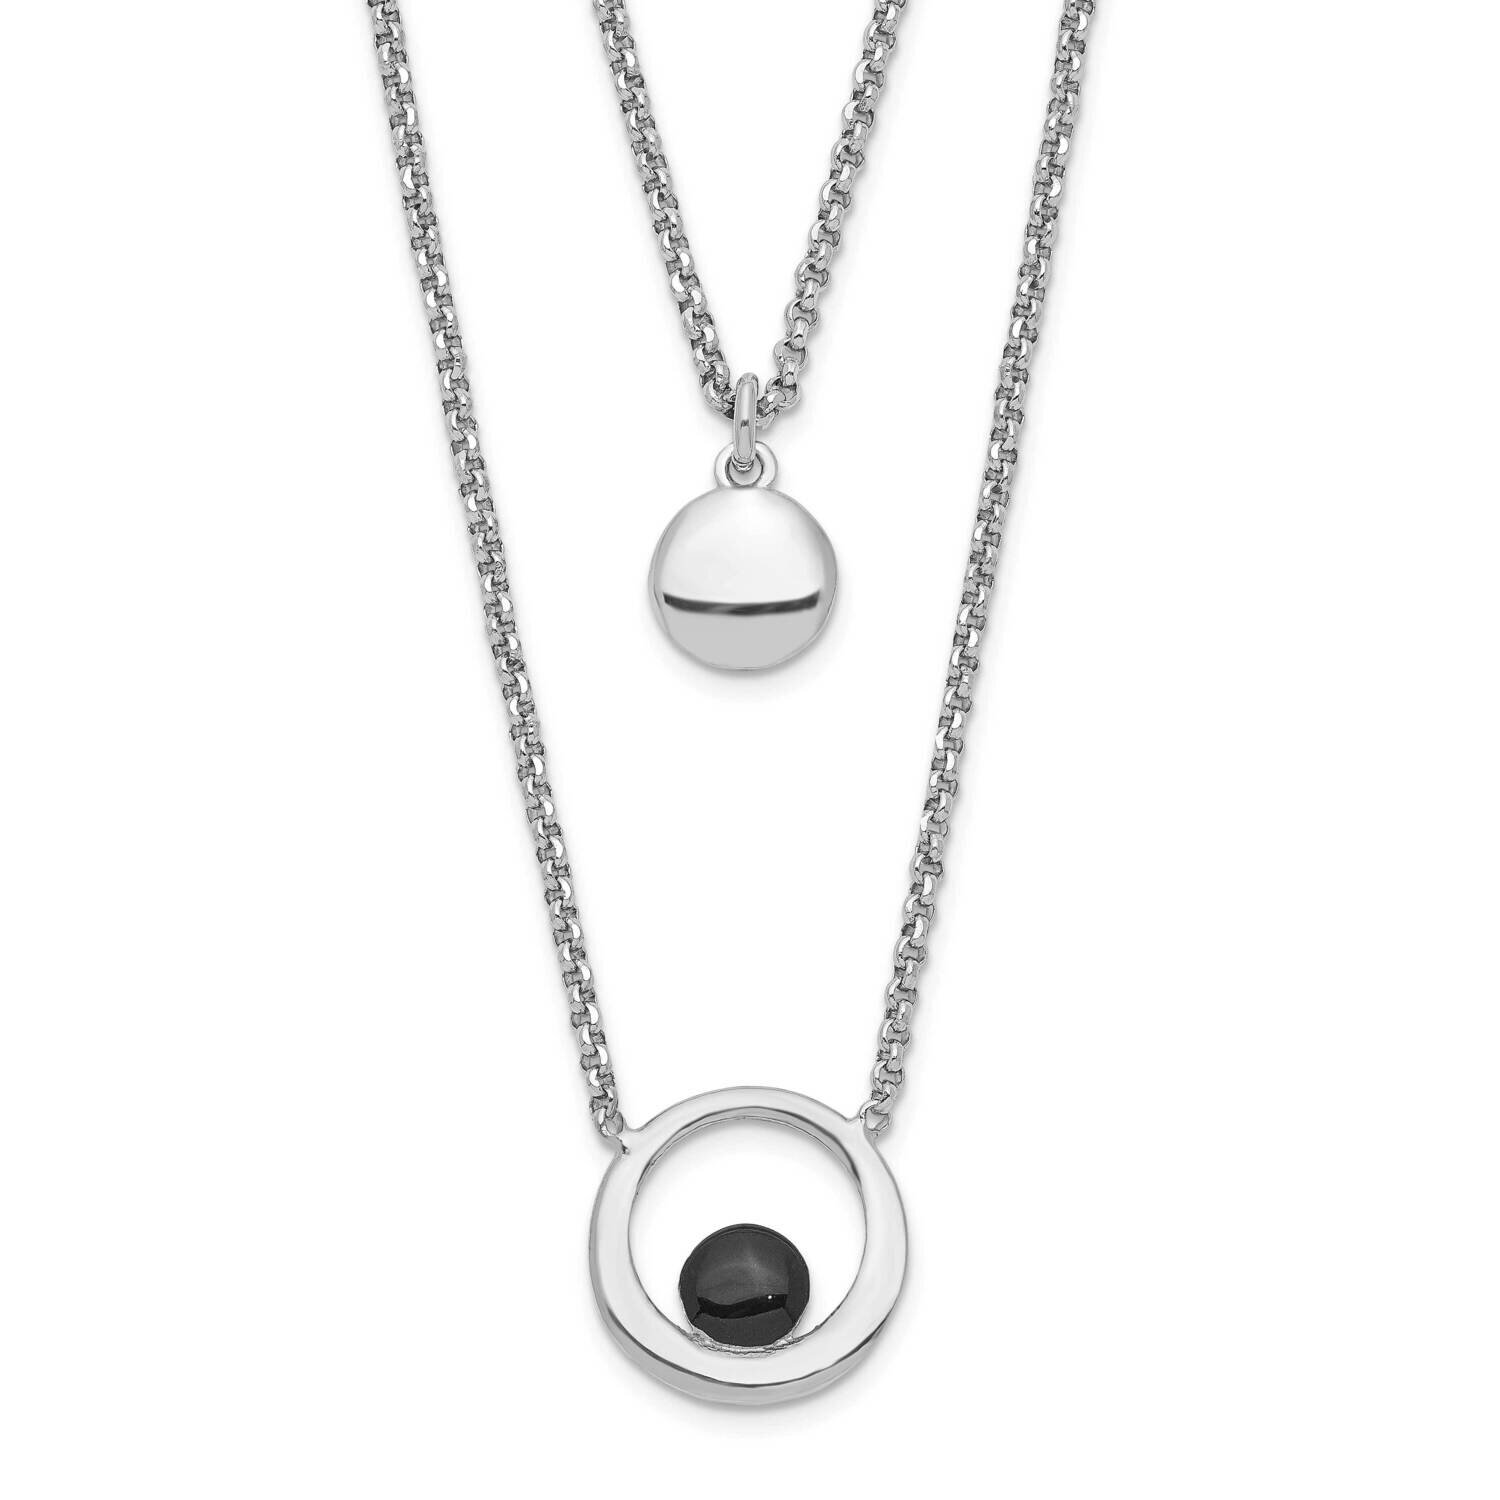 Enamel Circles 2-Strand with 1 Inch Extender Necklace 15.5 Inch Sterling Silver Rhodium-Plated QG6010-15.5